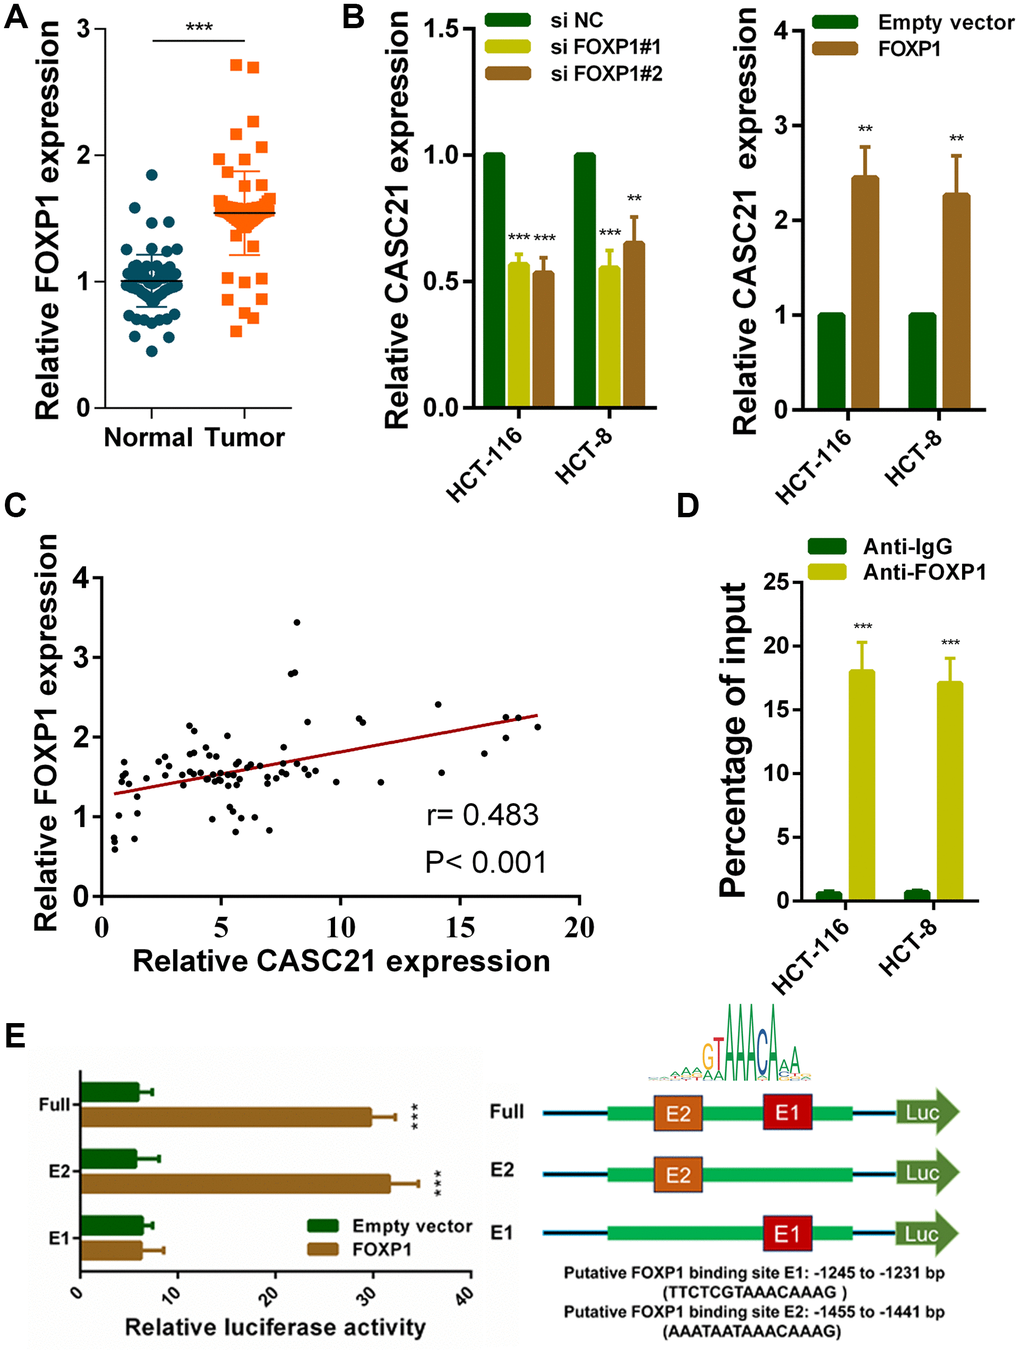 FOXP1 induces CASC21 high expression in CRC. (A) FOXP1 expression was detected by qRT-PCR in 80 pairs of CRC and corresponding adjacent normal tissues. (B) CASC21 expression was detected in HCT-116 and HCT-8 cells transfected with FOXP1 siRNAs or FOXP1 overexpression vector by qRT-PCR. (C) The correlation between FOXP1 and CASC21 expression analyzed in 80 paired CRC samples (n= 80, r= 0.483, PD) ChIP assays were conducted to identify FOXP1 occupancy in the CASC21 promoter region. (E) Luciferase reporter assays were used to determine the FOXP1 binding sites on the CASC21 promoter region. All data represent mean ± SEM (n = 3-6). **P ***P 